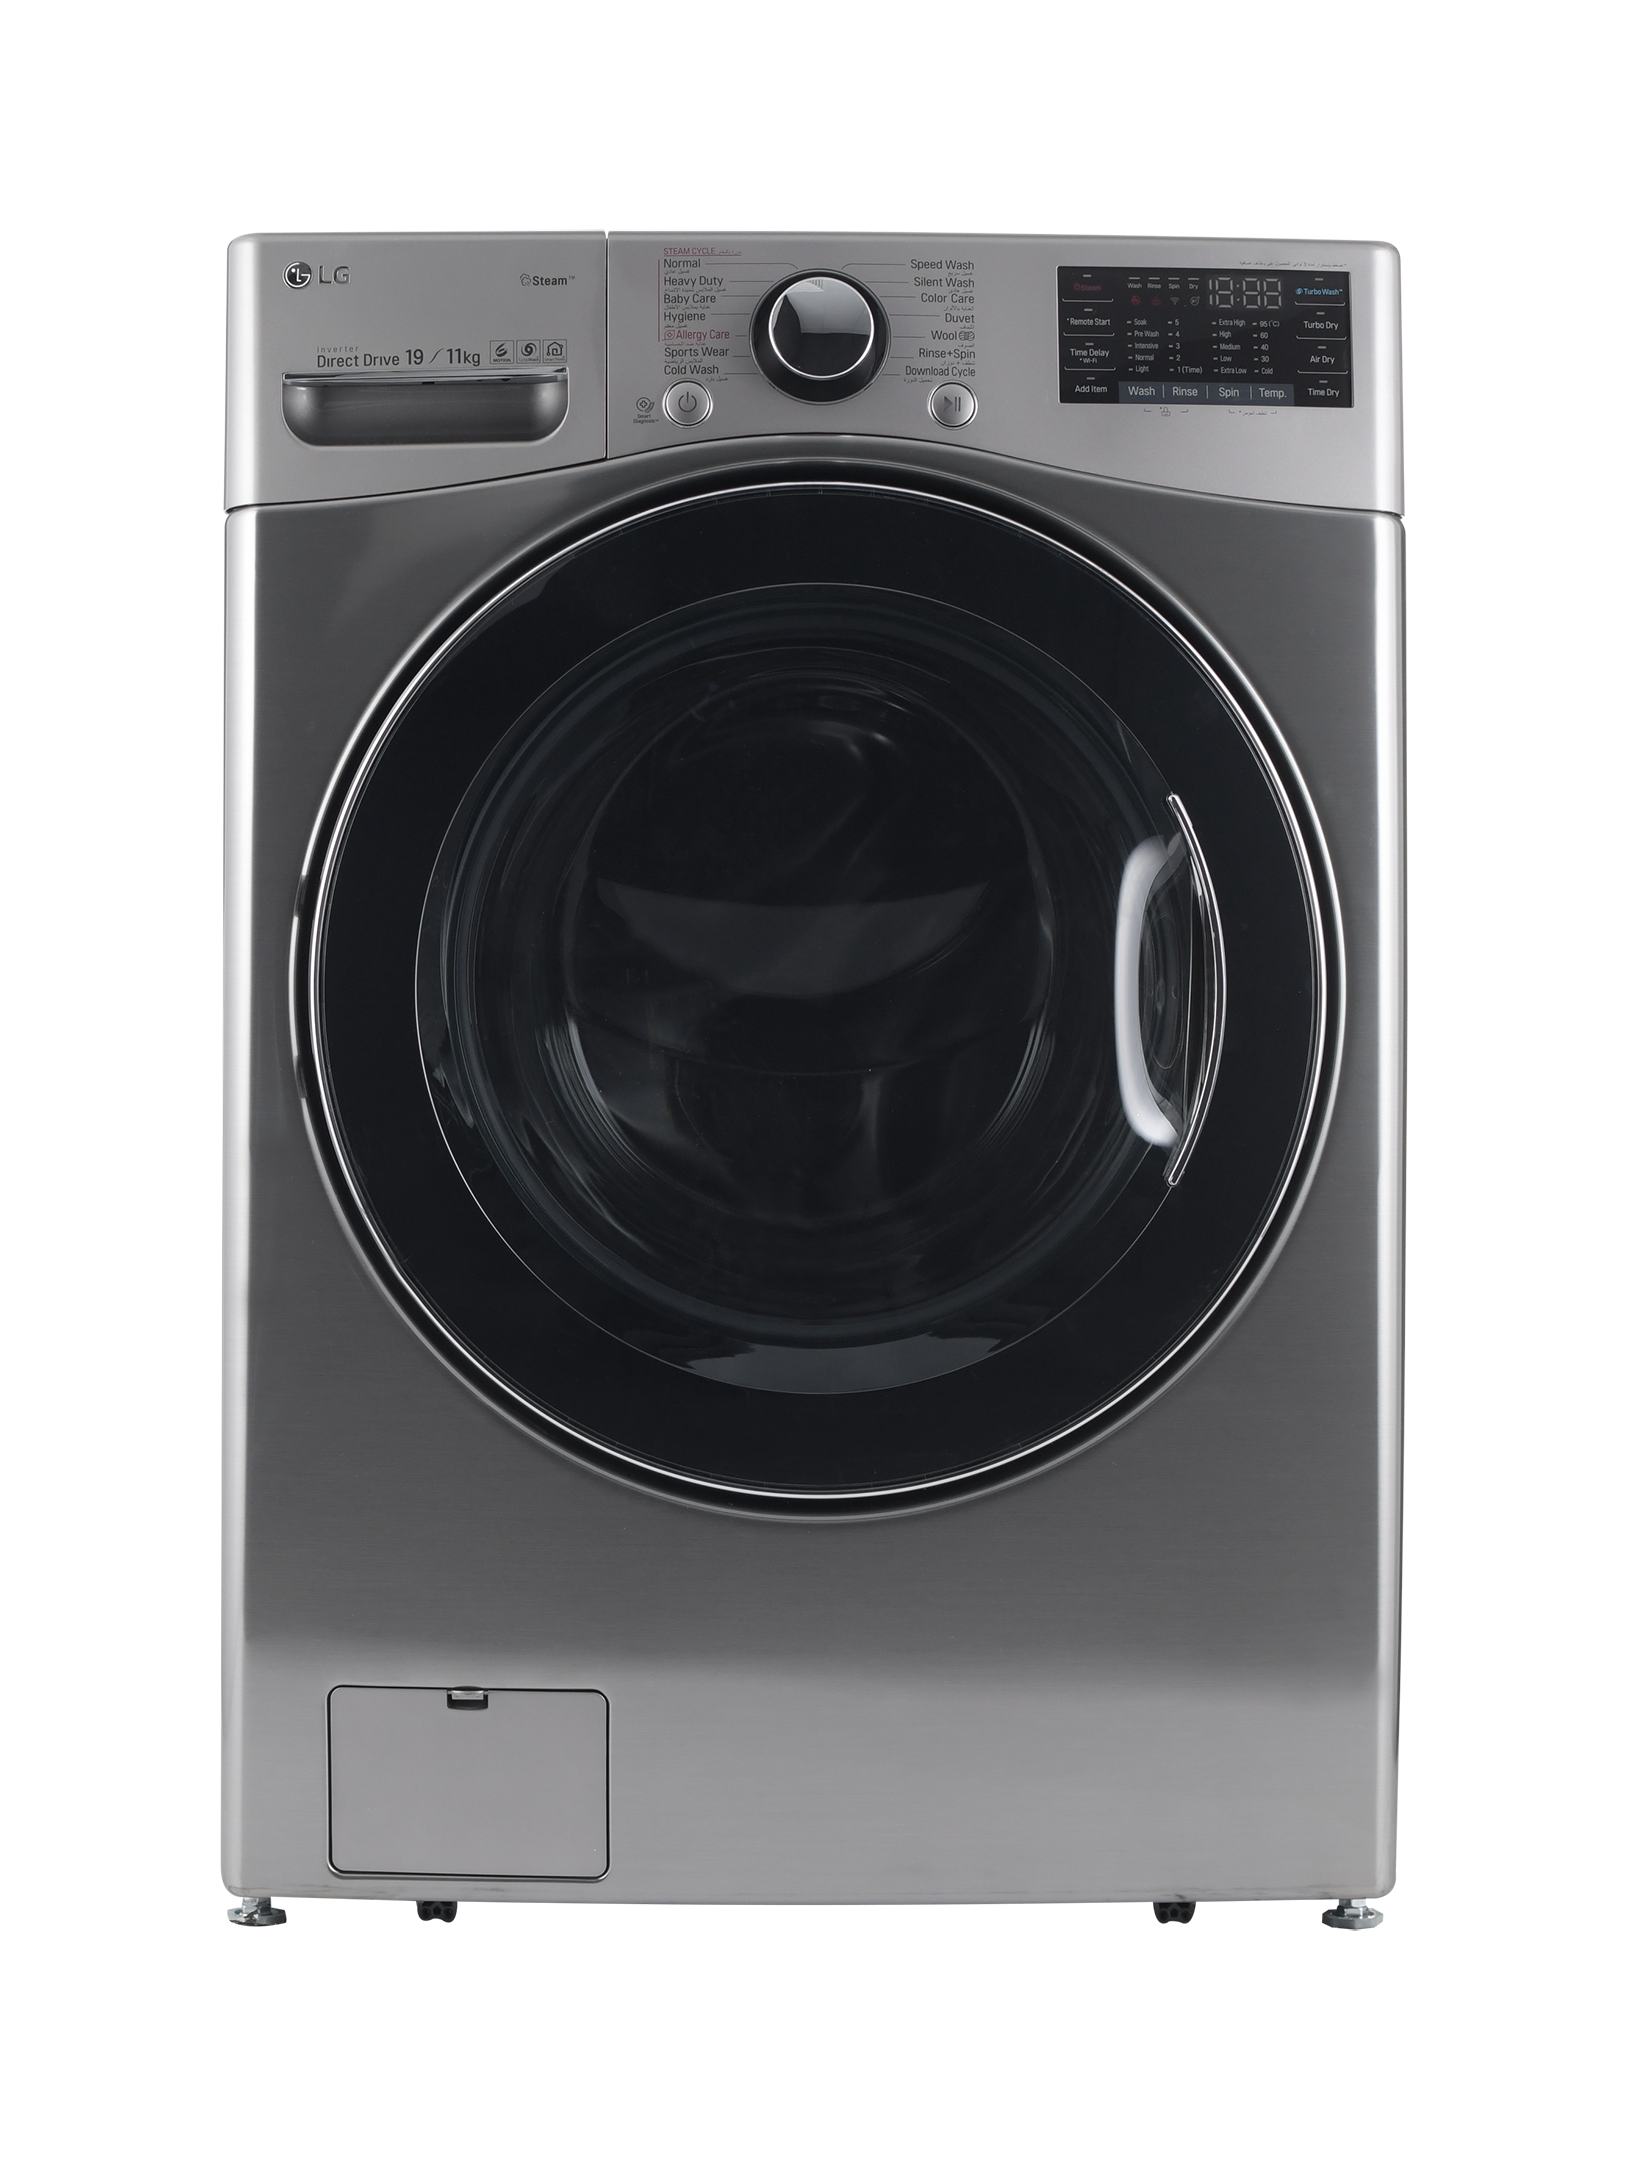 Buy LG Front Load Washer/Dryer Combo, 19 Kg / 11kg, Inverter Direct Drive,Wi-Fi, Stainless Silver in Saudi Arabia